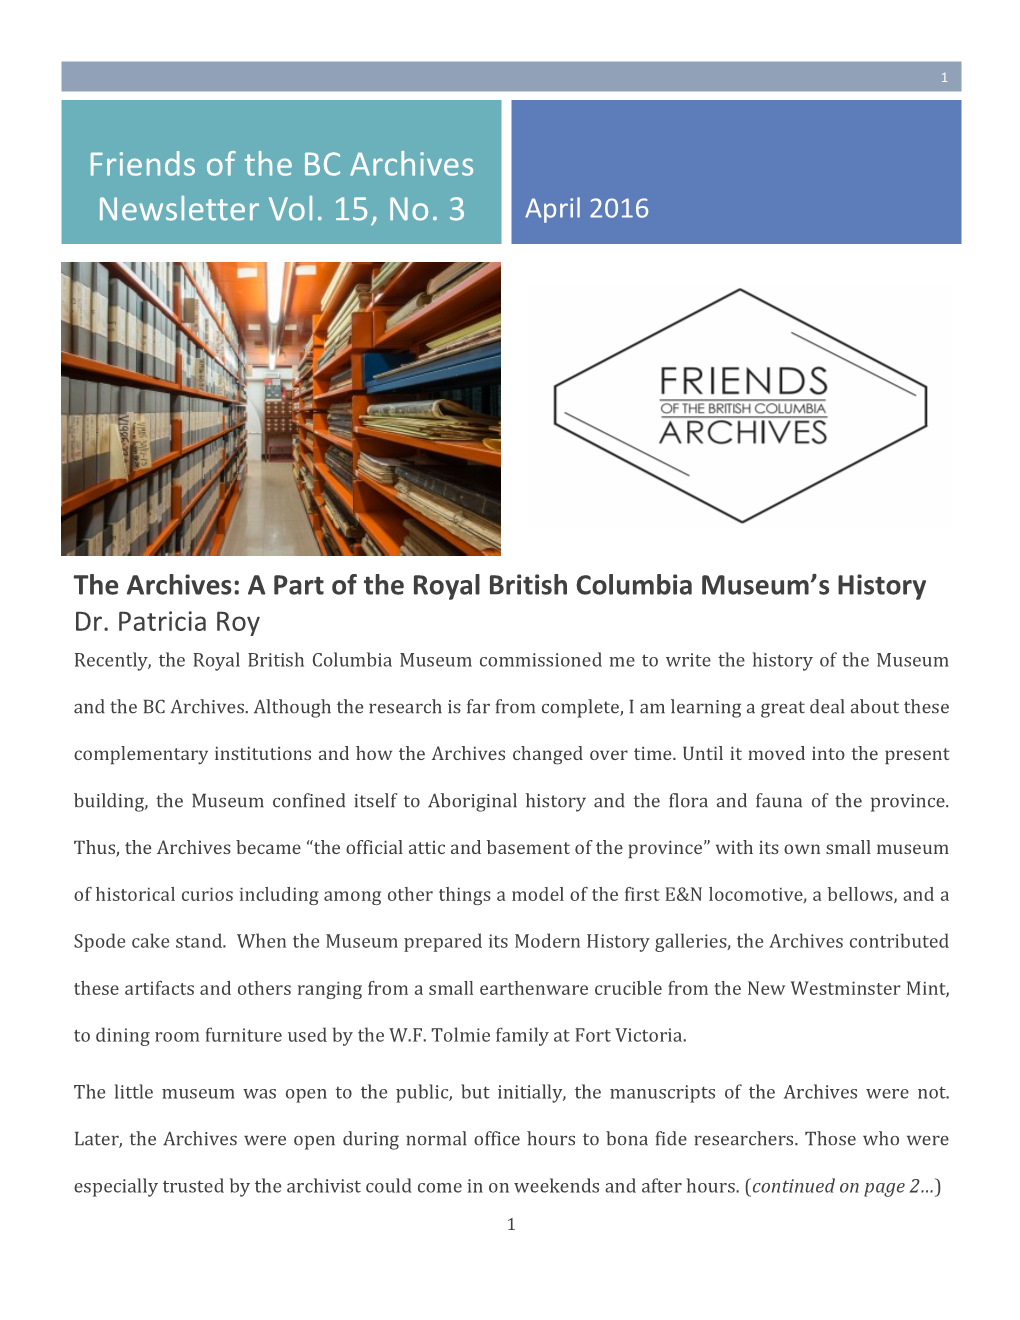 Friends of the BC Archives Newsletter Vol. 15, No. 3 April 2016